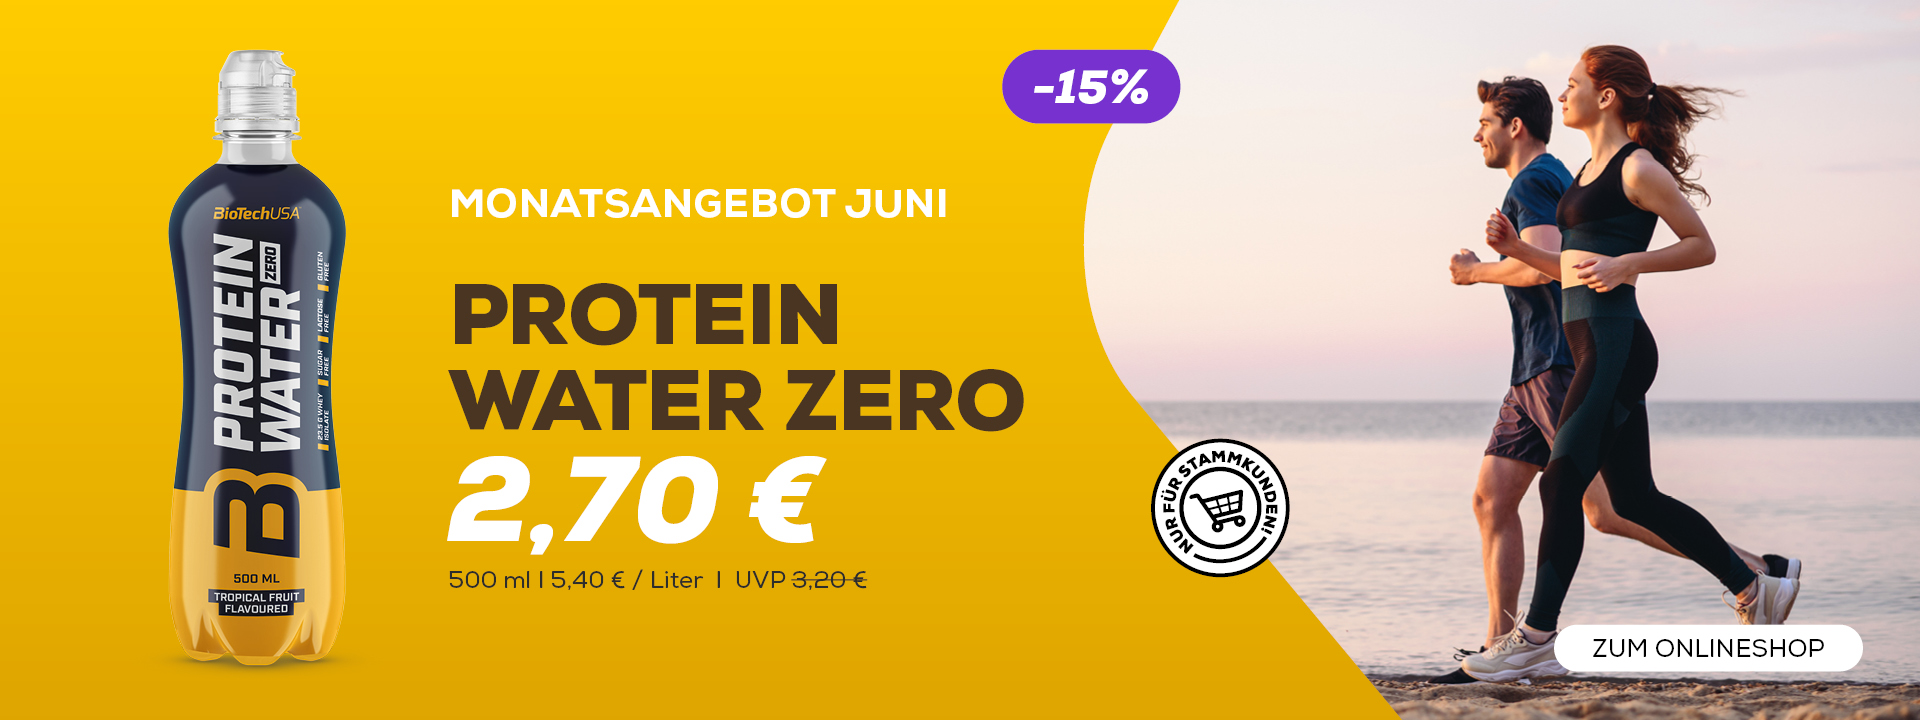 Protein water -15%